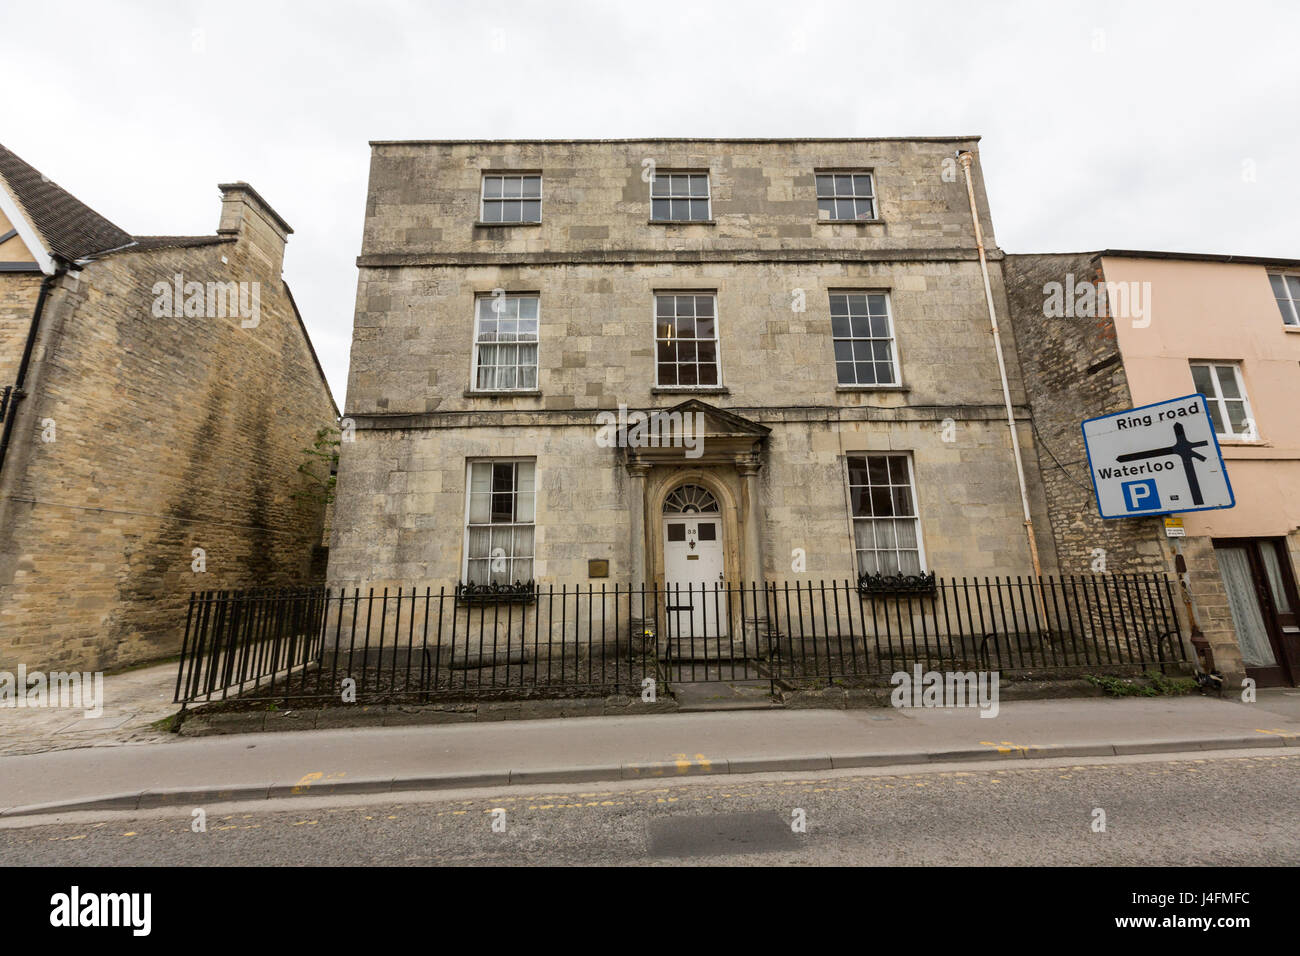 Edwardian house architecture, Cirencester, Gloucestershire, Angleterre Banque D'Images